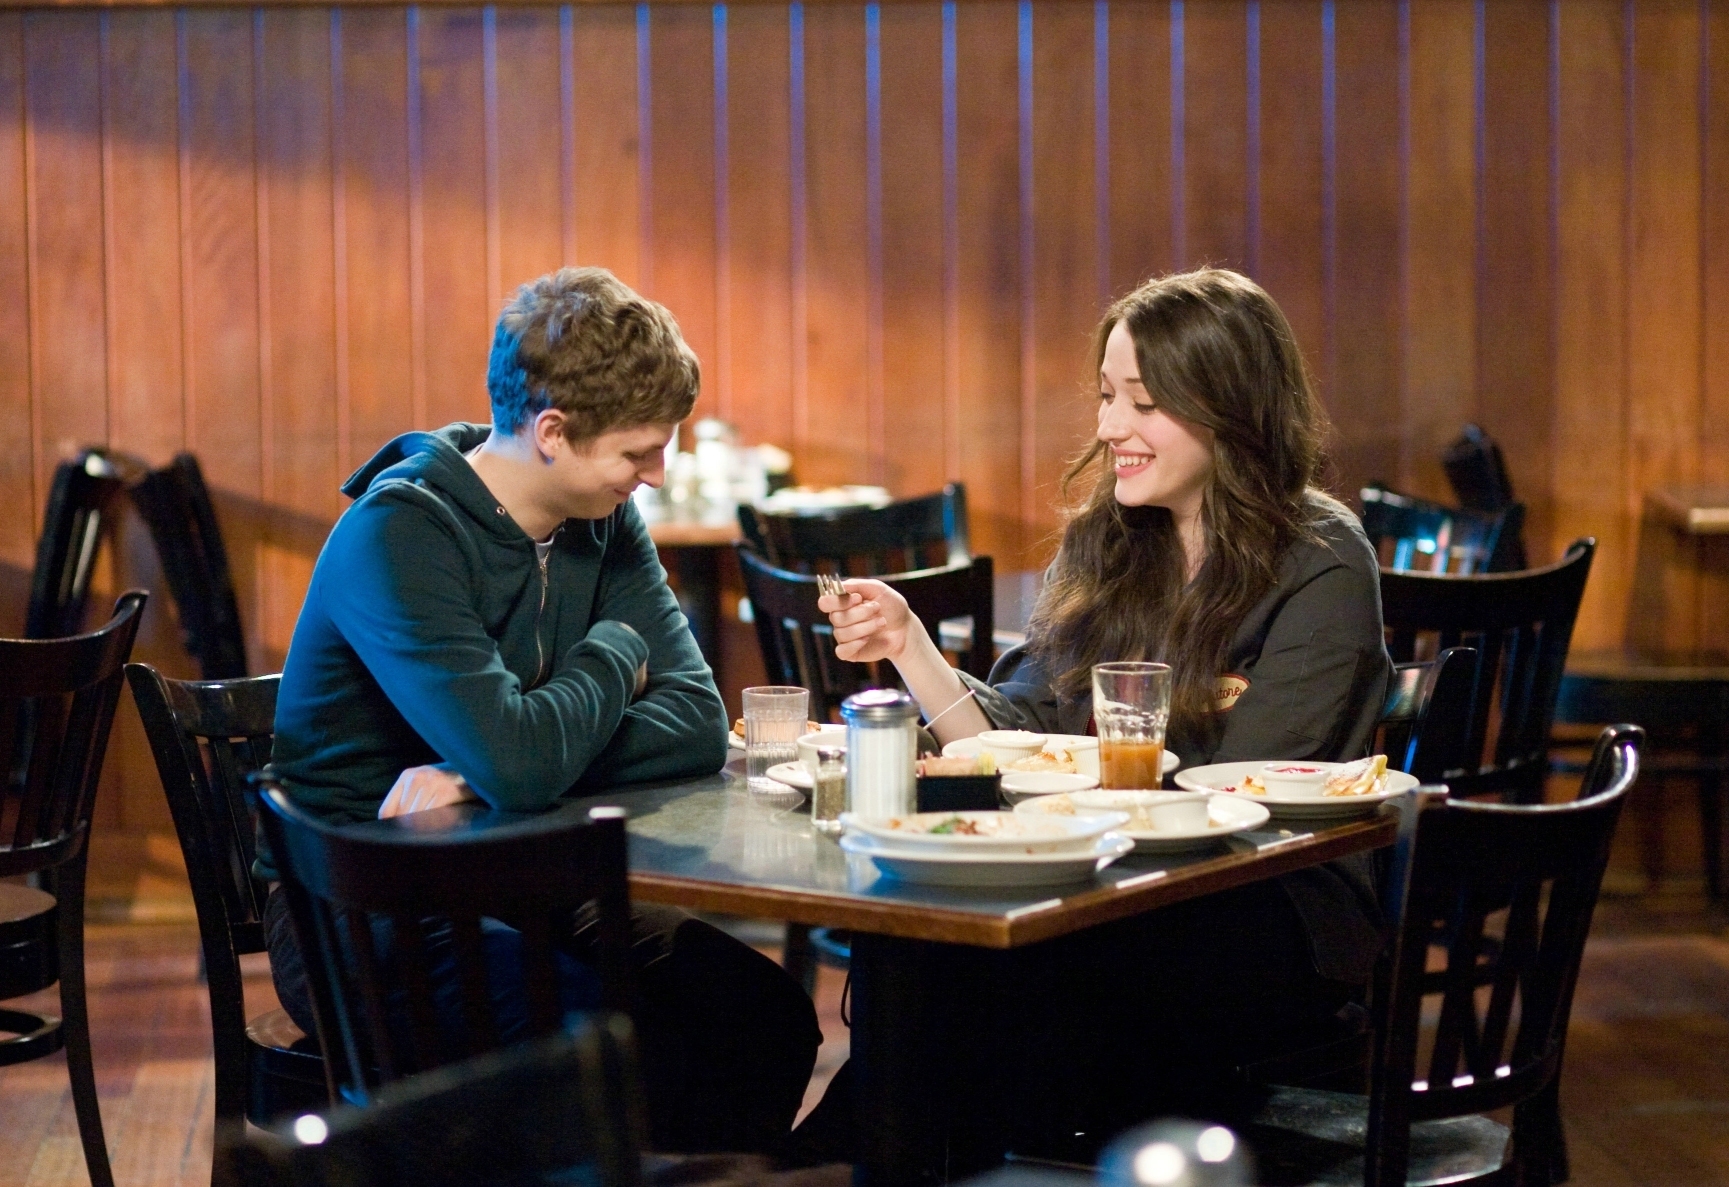 Nick And Norah's Infinite Playlist Backgrounds, Compatible - PC, Mobile, Gadgets| 1729x1187 px